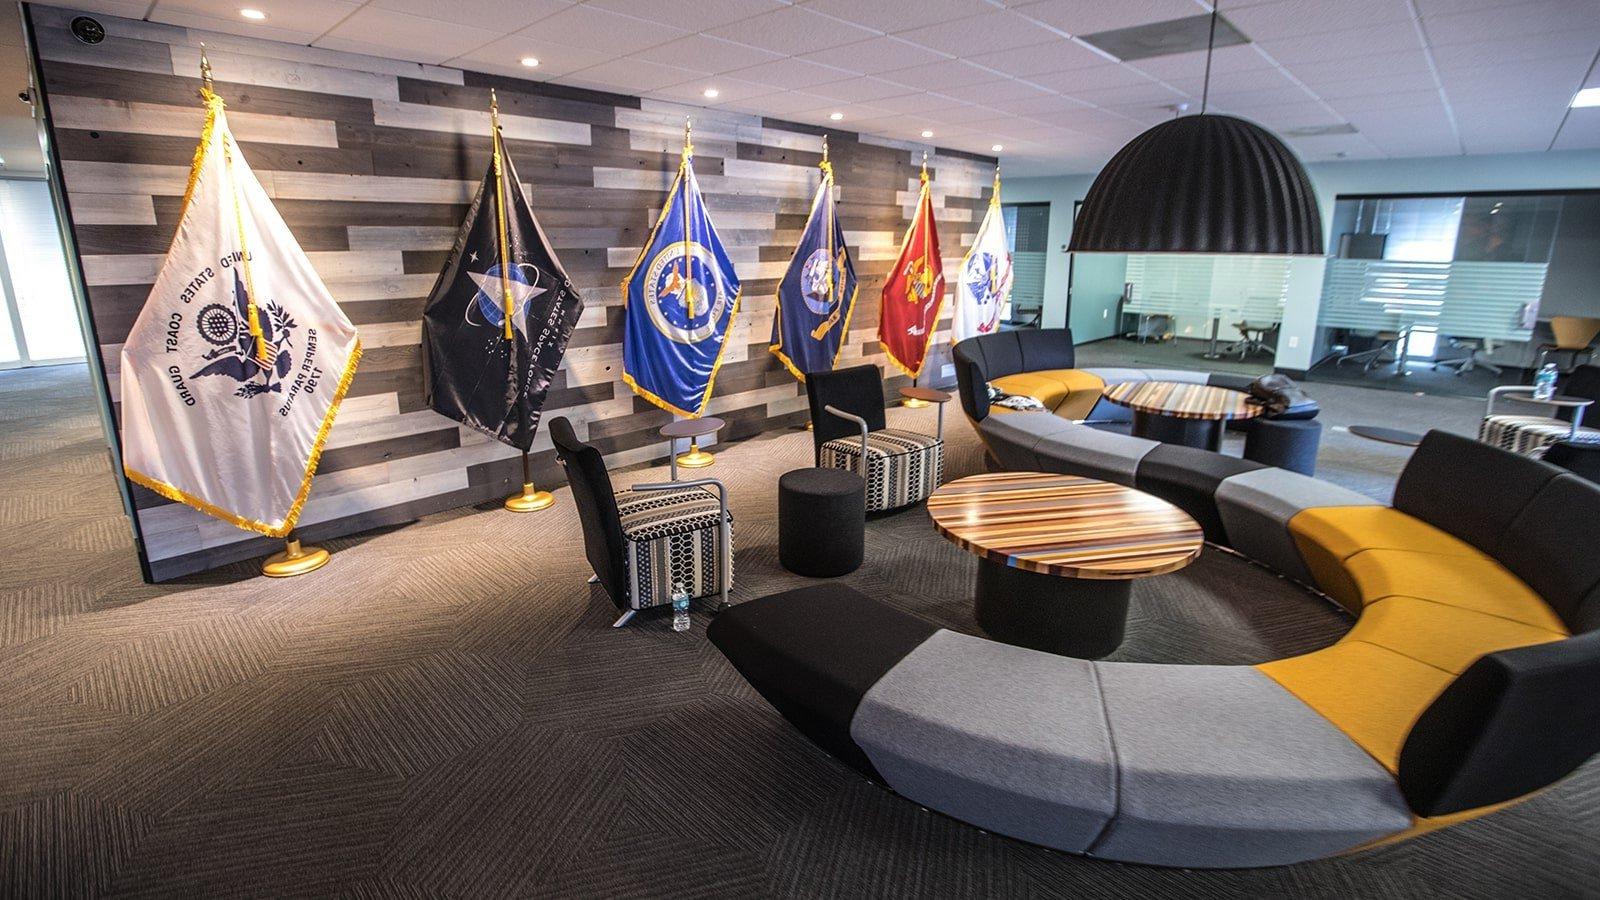 An image of 满帆’s 军事 Student Success center shows a large couch, 小型会议室, 和 flags representing each branch of the US Armed Services.